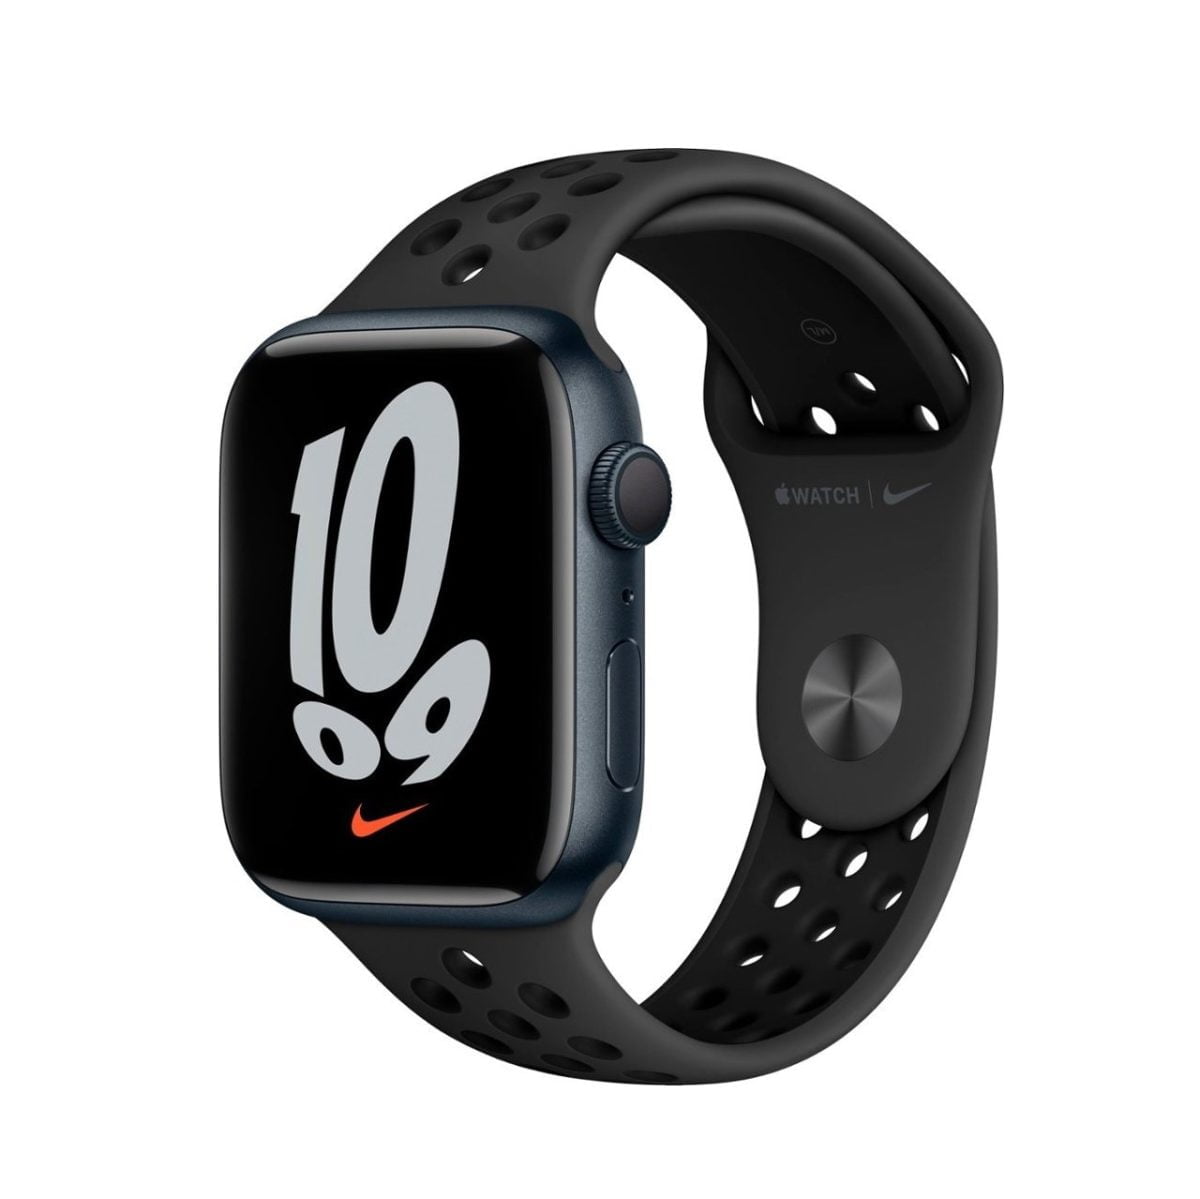 5706677 Sd Apple &Amp;Lt;H1&Amp;Gt;Apple Watch Nike Series 7 (Gps) 41Mm Nike Sport Band - Midnight&Amp;Lt;/H1&Amp;Gt; &Amp;Lt;H2&Amp;Gt;Model: Mkn43&Amp;Lt;/H2&Amp;Gt; Https://Www.youtube.com/Watch?V=Mmdq-Gwbnze &Amp;Lt;Div Class=&Amp;Quot;Long-Description-Container Body-Copy &Amp;Quot;&Amp;Gt; &Amp;Lt;Div Class=&Amp;Quot;Html-Fragment&Amp;Quot;&Amp;Gt; &Amp;Lt;Div&Amp;Gt; &Amp;Lt;Div&Amp;Gt;The Largest, Most Advanced Always-On Retina Display Yet Makes Everything You Do With Your Apple Watch Series 7 Bigger And Better. Series 7 Is The Most Durable Apple Watch Ever Built, With An, Even More, Crack-Resistant Front Crystal. Advanced Features Let You Measure Your Blood Oxygen Level,¹ Take An Ecg Anytime,² And Access Mindfulness And Sleep Tracking Apps. You Can Also Track Dozens Of Workouts, Including New Tai Chi And Pilates.&Amp;Lt;/Div&Amp;Gt; &Amp;Lt;/Div&Amp;Gt; &Amp;Lt;/Div&Amp;Gt; &Amp;Lt;/Div&Amp;Gt; Apple Watch Nike Series Apple Watch Nike Series 7 (Gps) 41Mm - Midnight